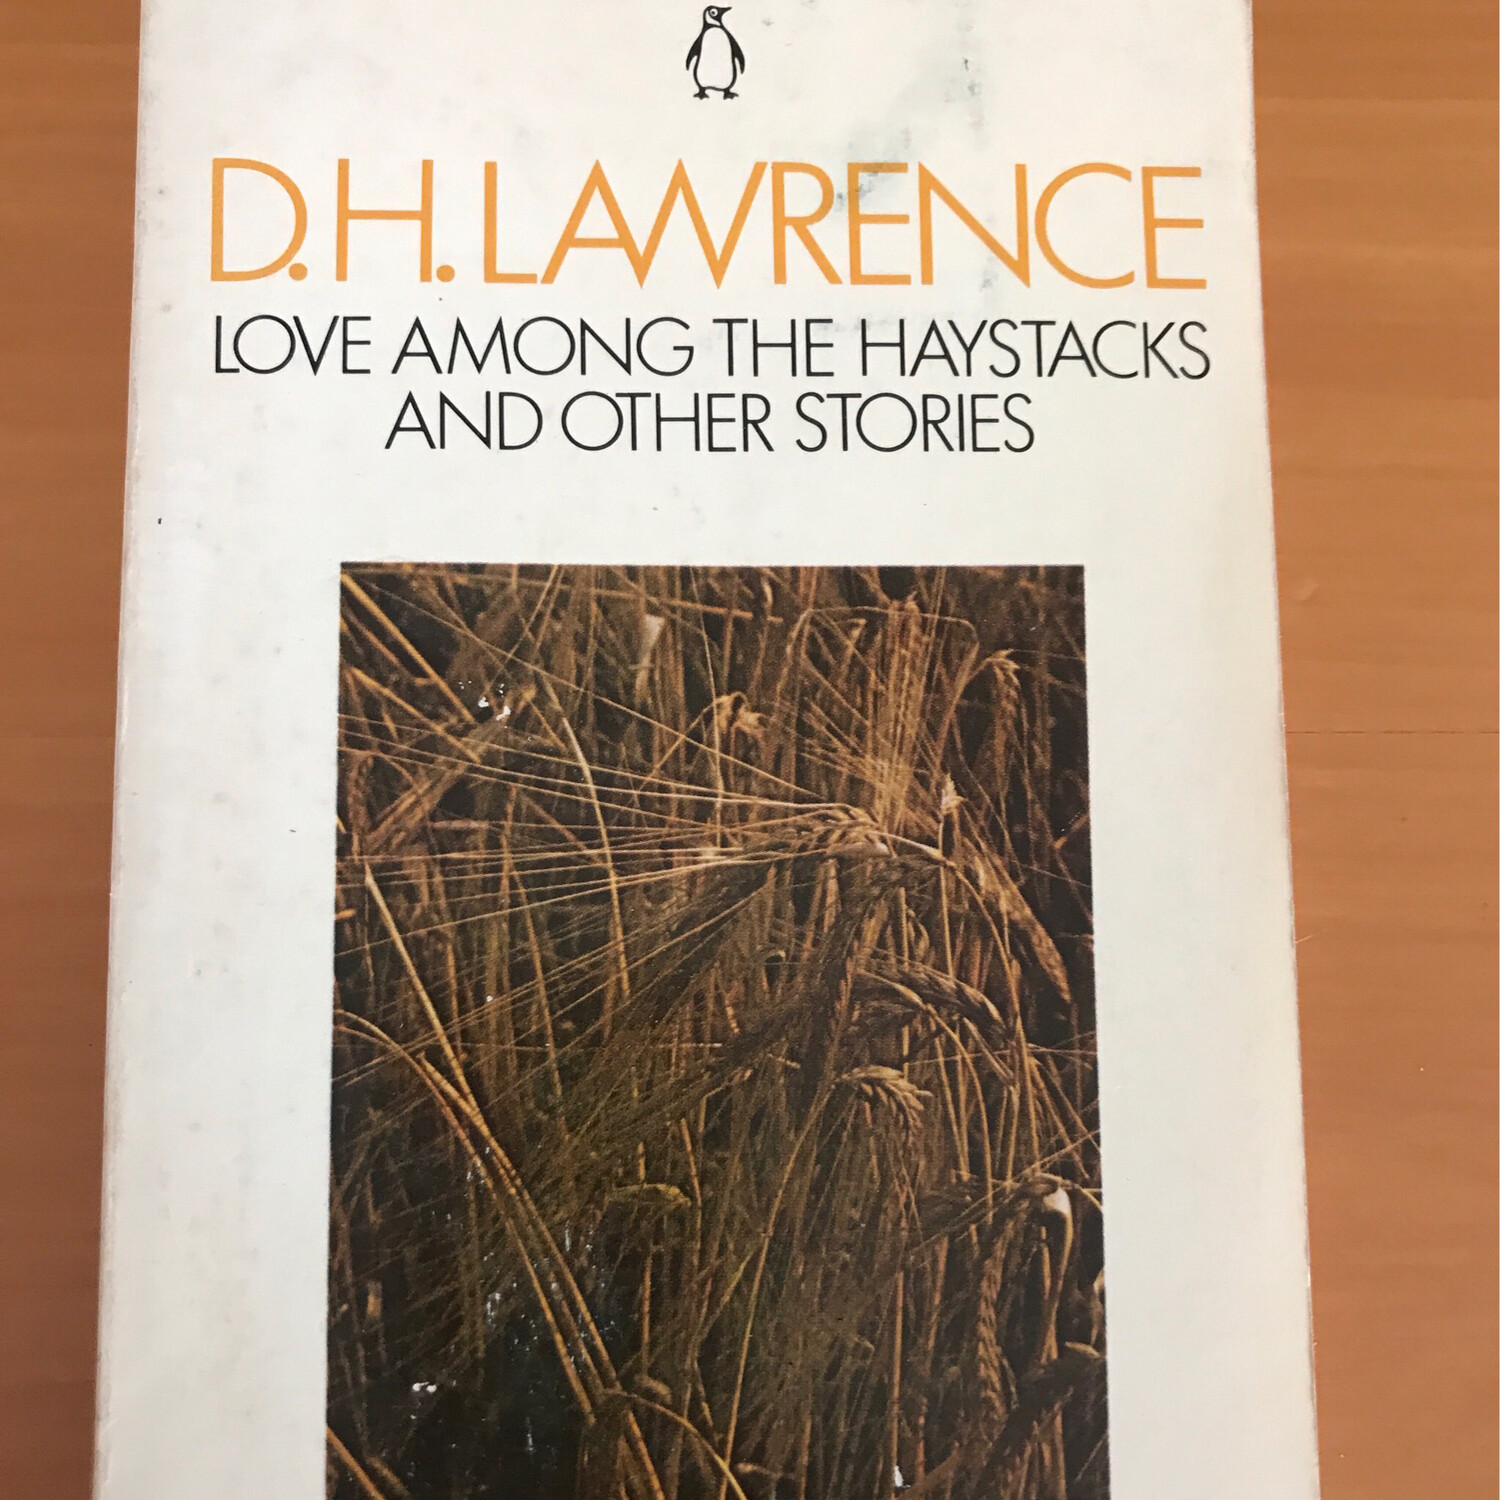 Love Among The Haystacks And Other Stories, D. H. Lawrence